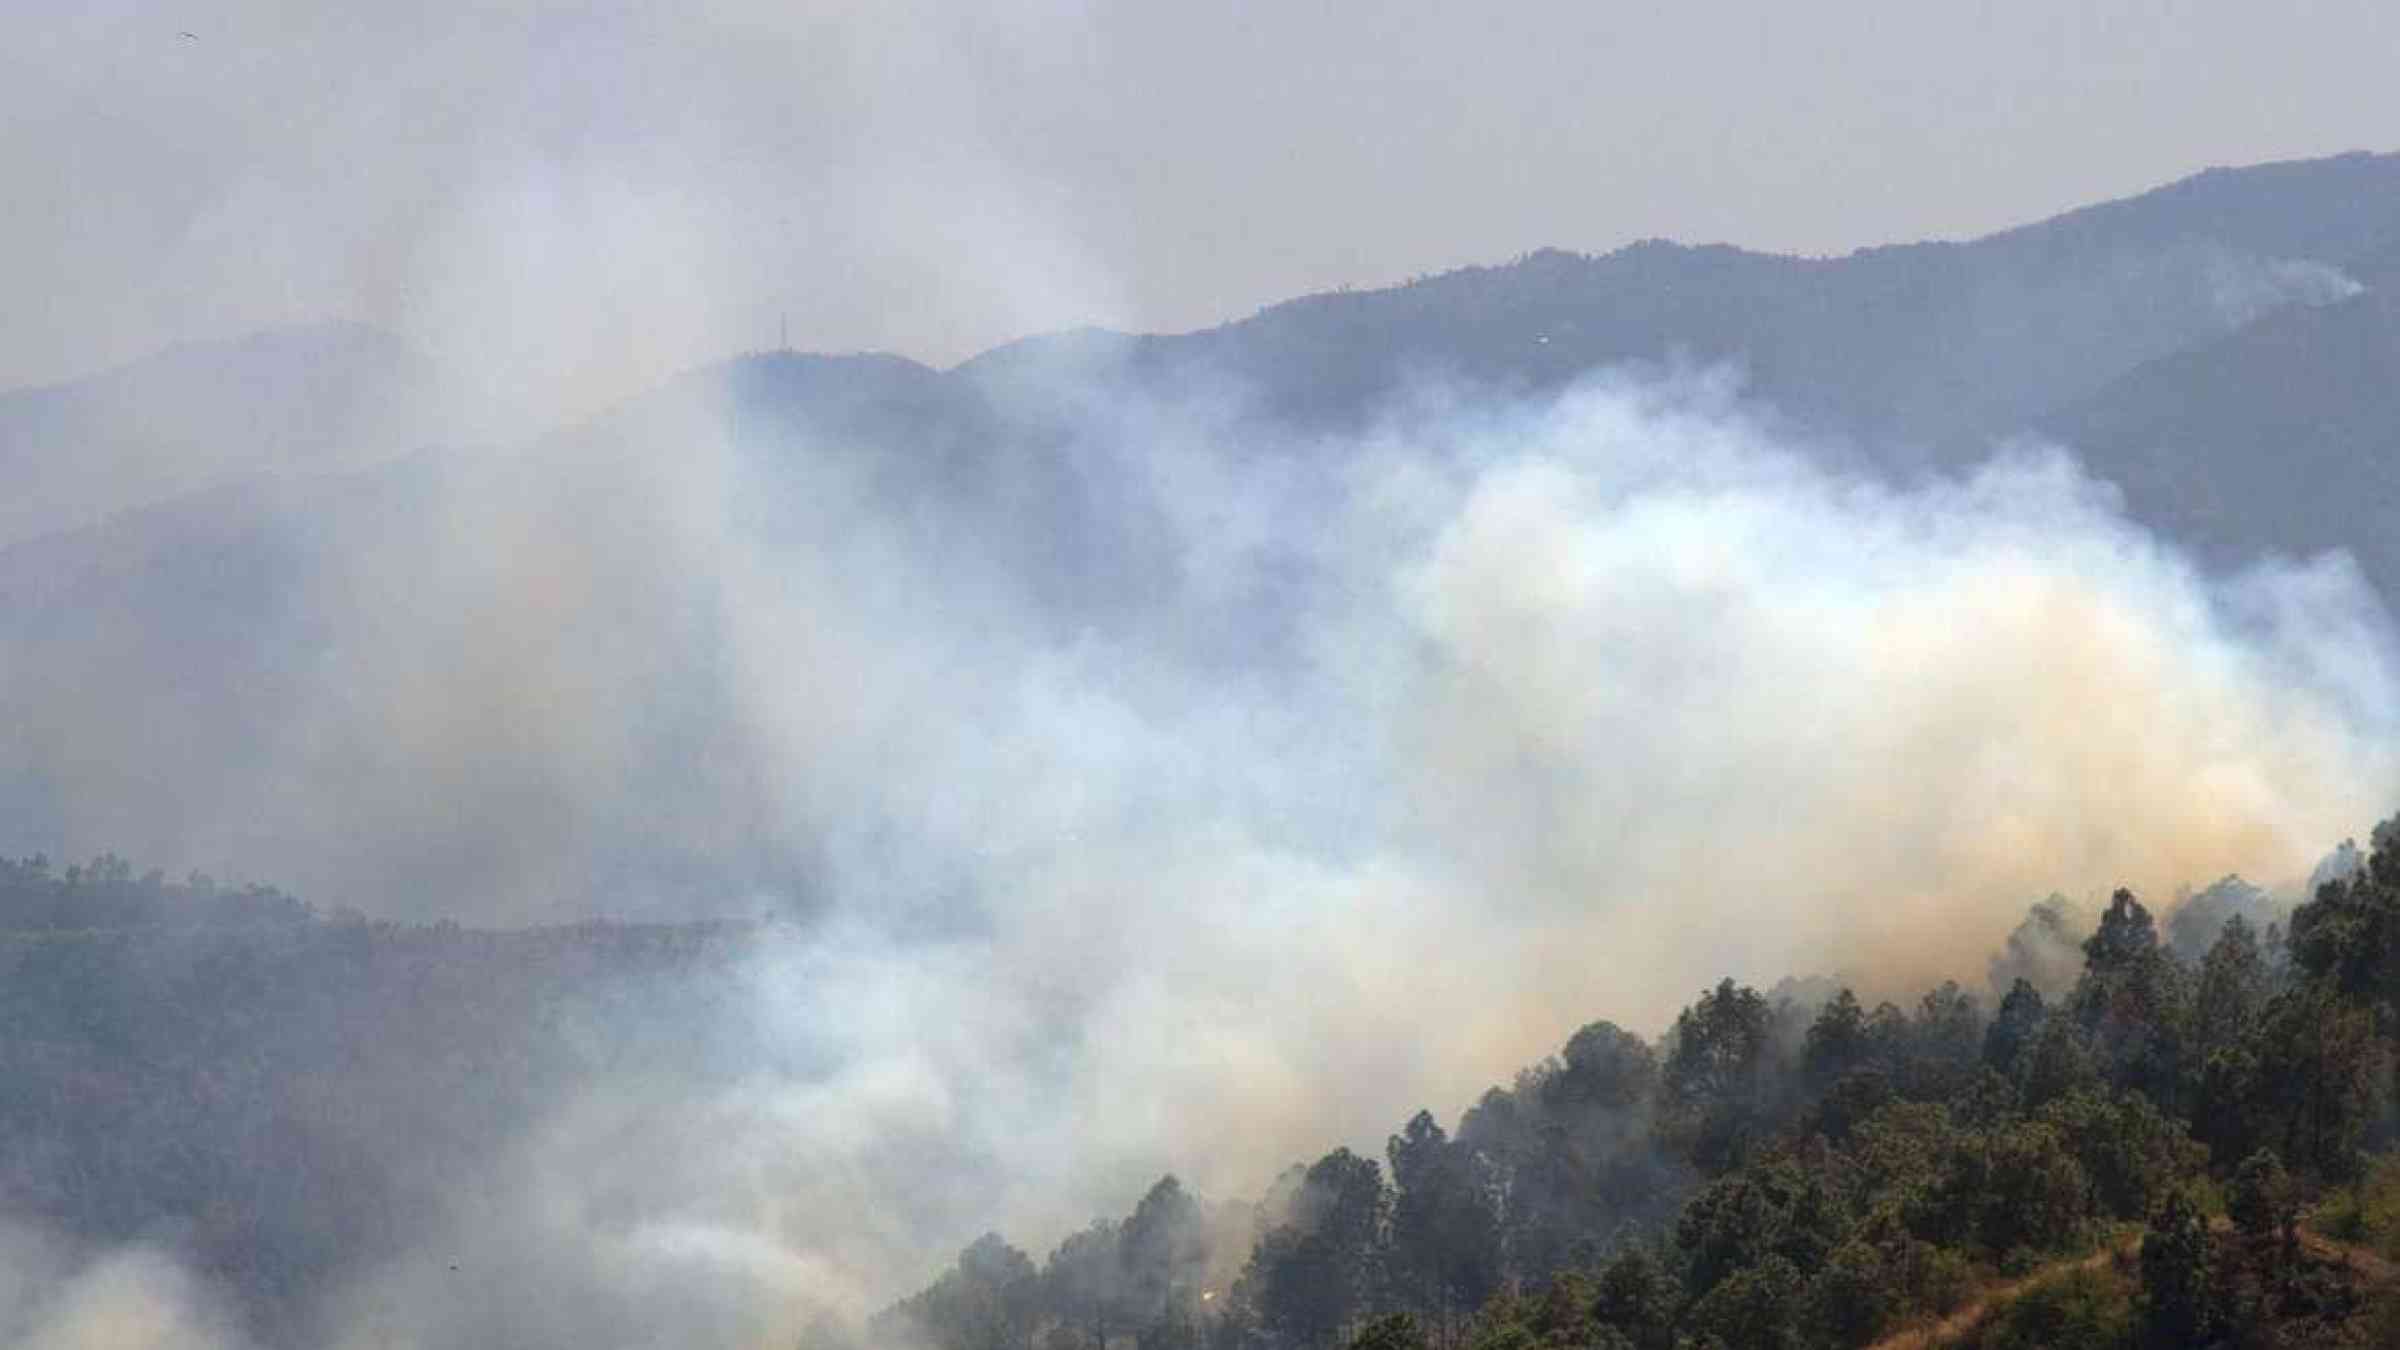 Forest fire on the dry slopes of the Himalayas where terraced farming is conducted. India